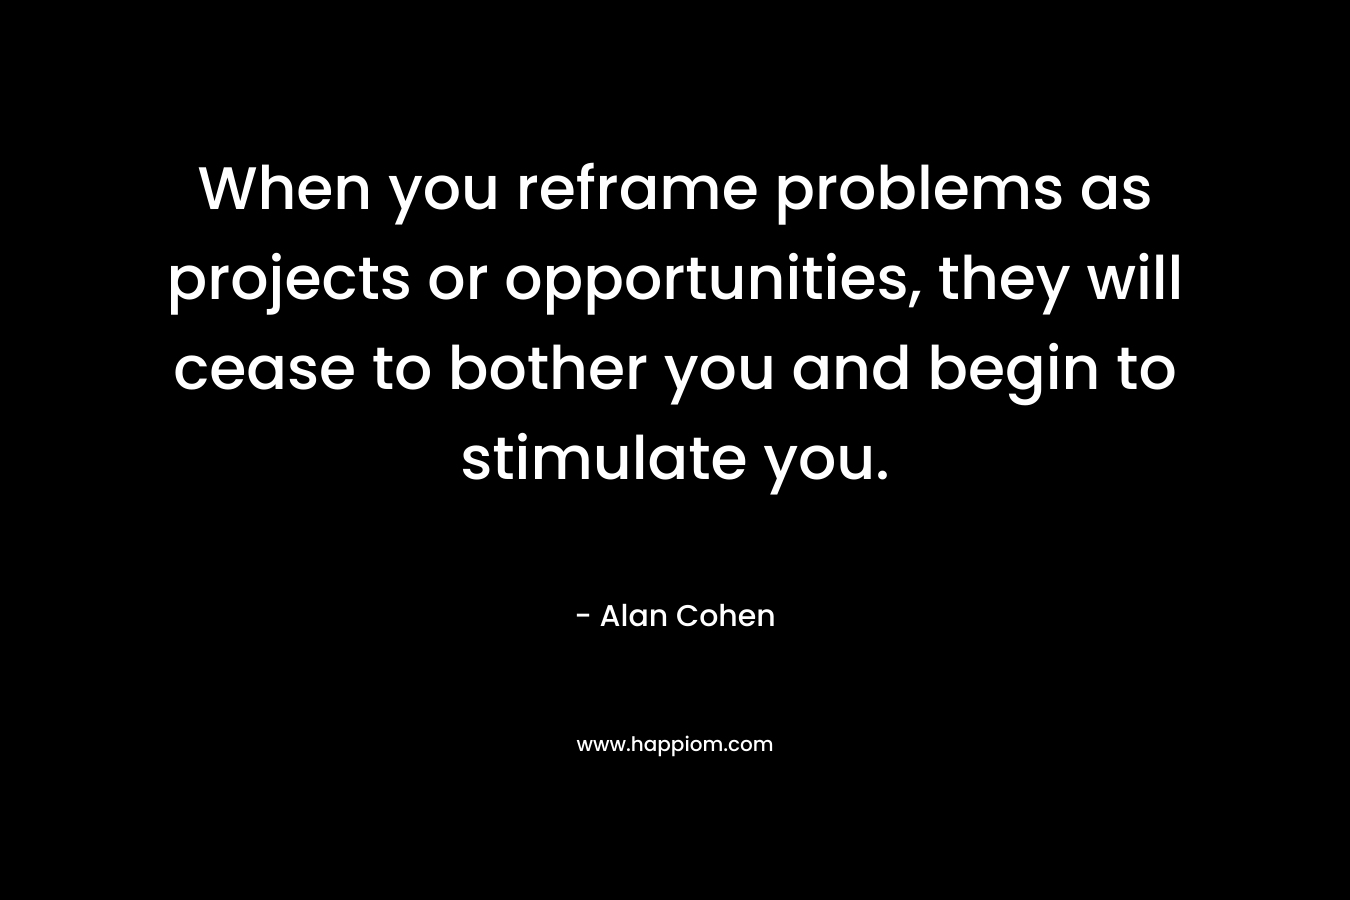 When you reframe problems as projects or opportunities, they will cease to bother you and begin to stimulate you.